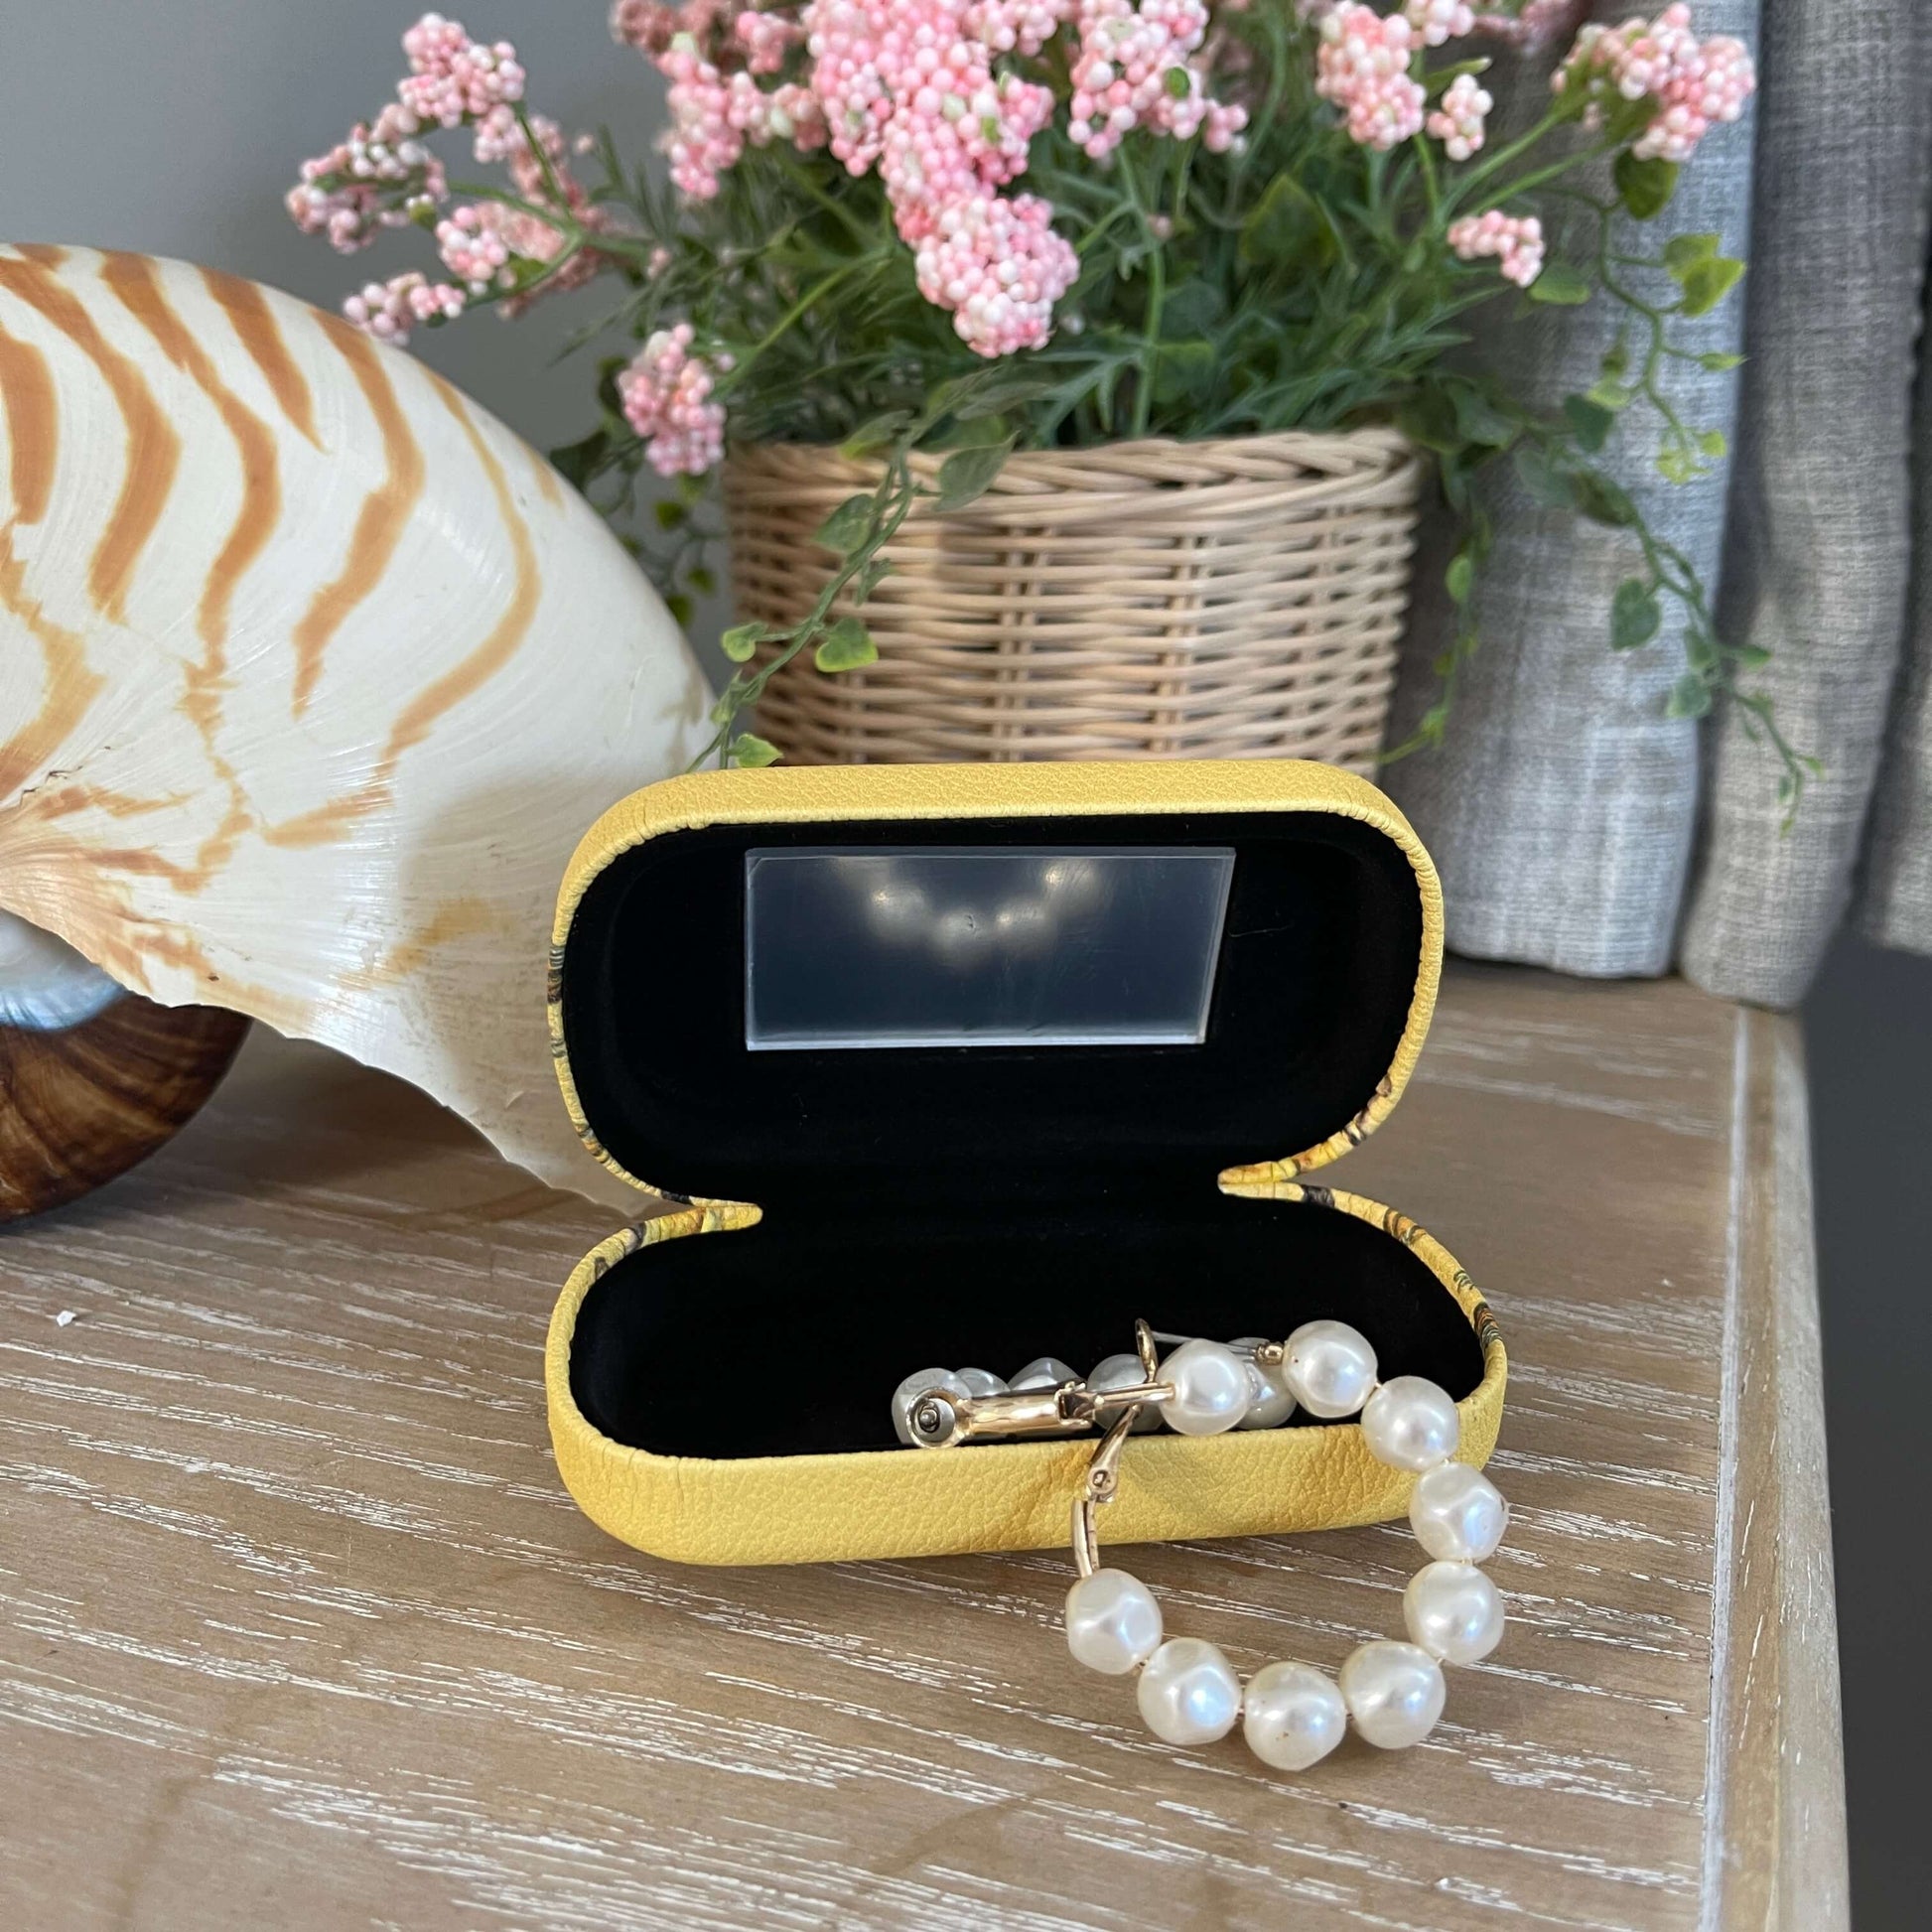 Small trinket case opened showing the mirror and with pearl earrings in it sitting on a table with a large shell and faux pot plant.